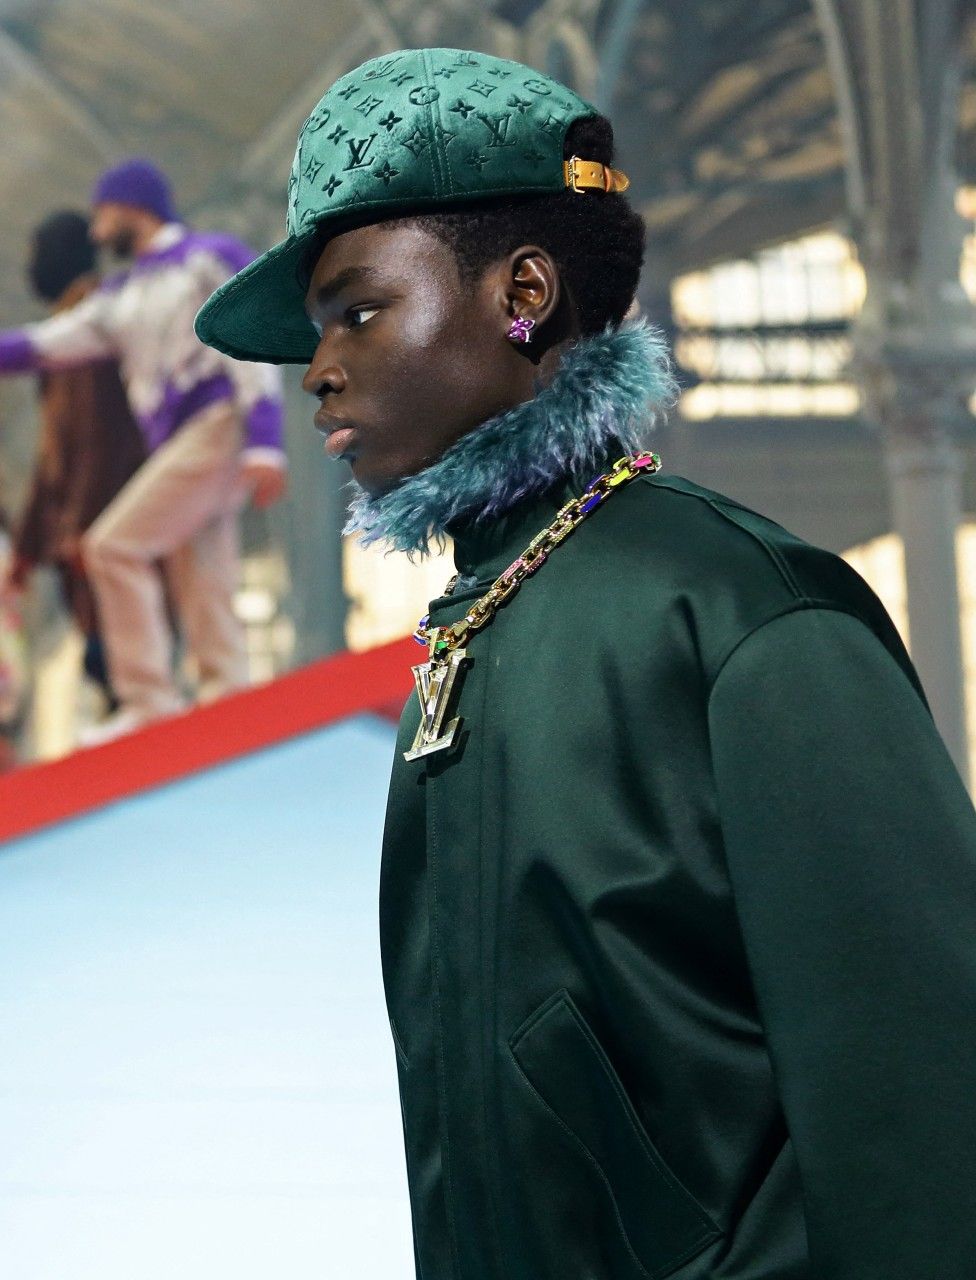 A model presents a creation by late designer Virgil Abloh as part of his Fall/Winter 2022 collection show for fashion house Louis Vuitton during Mens Fashion Week in Paris